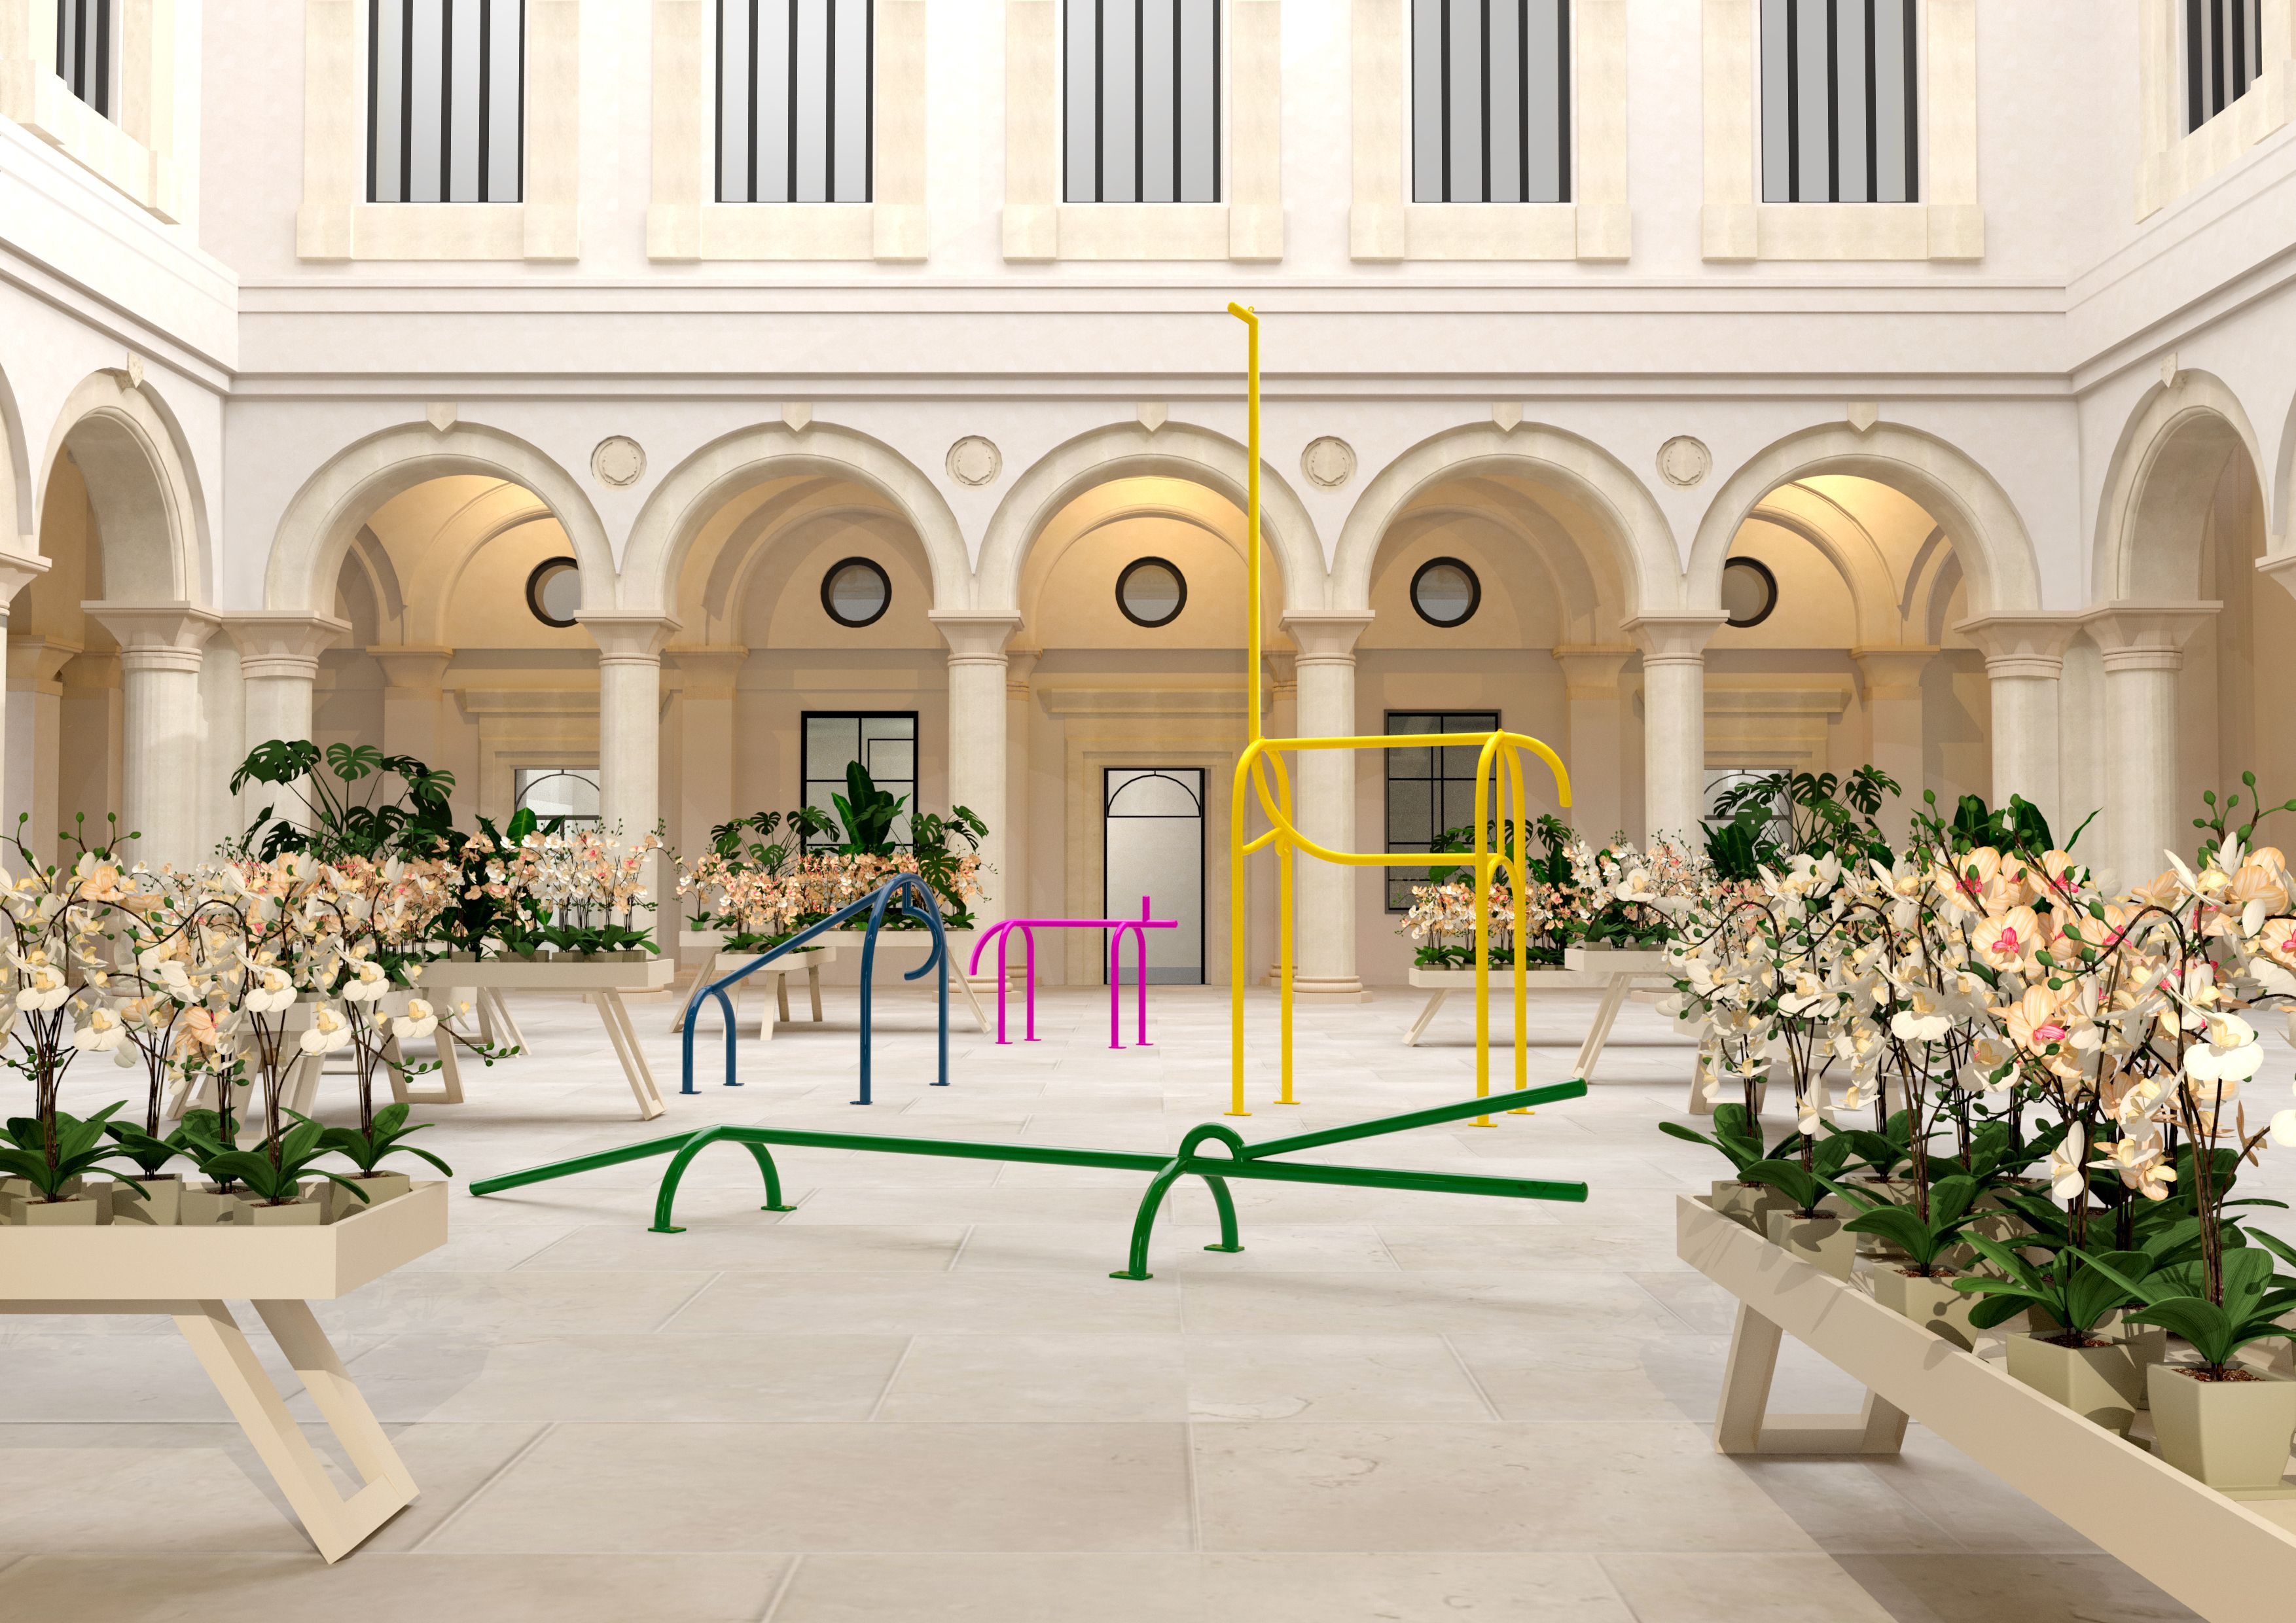 16 Architectural Installations at the 2023 Milan Design Week and